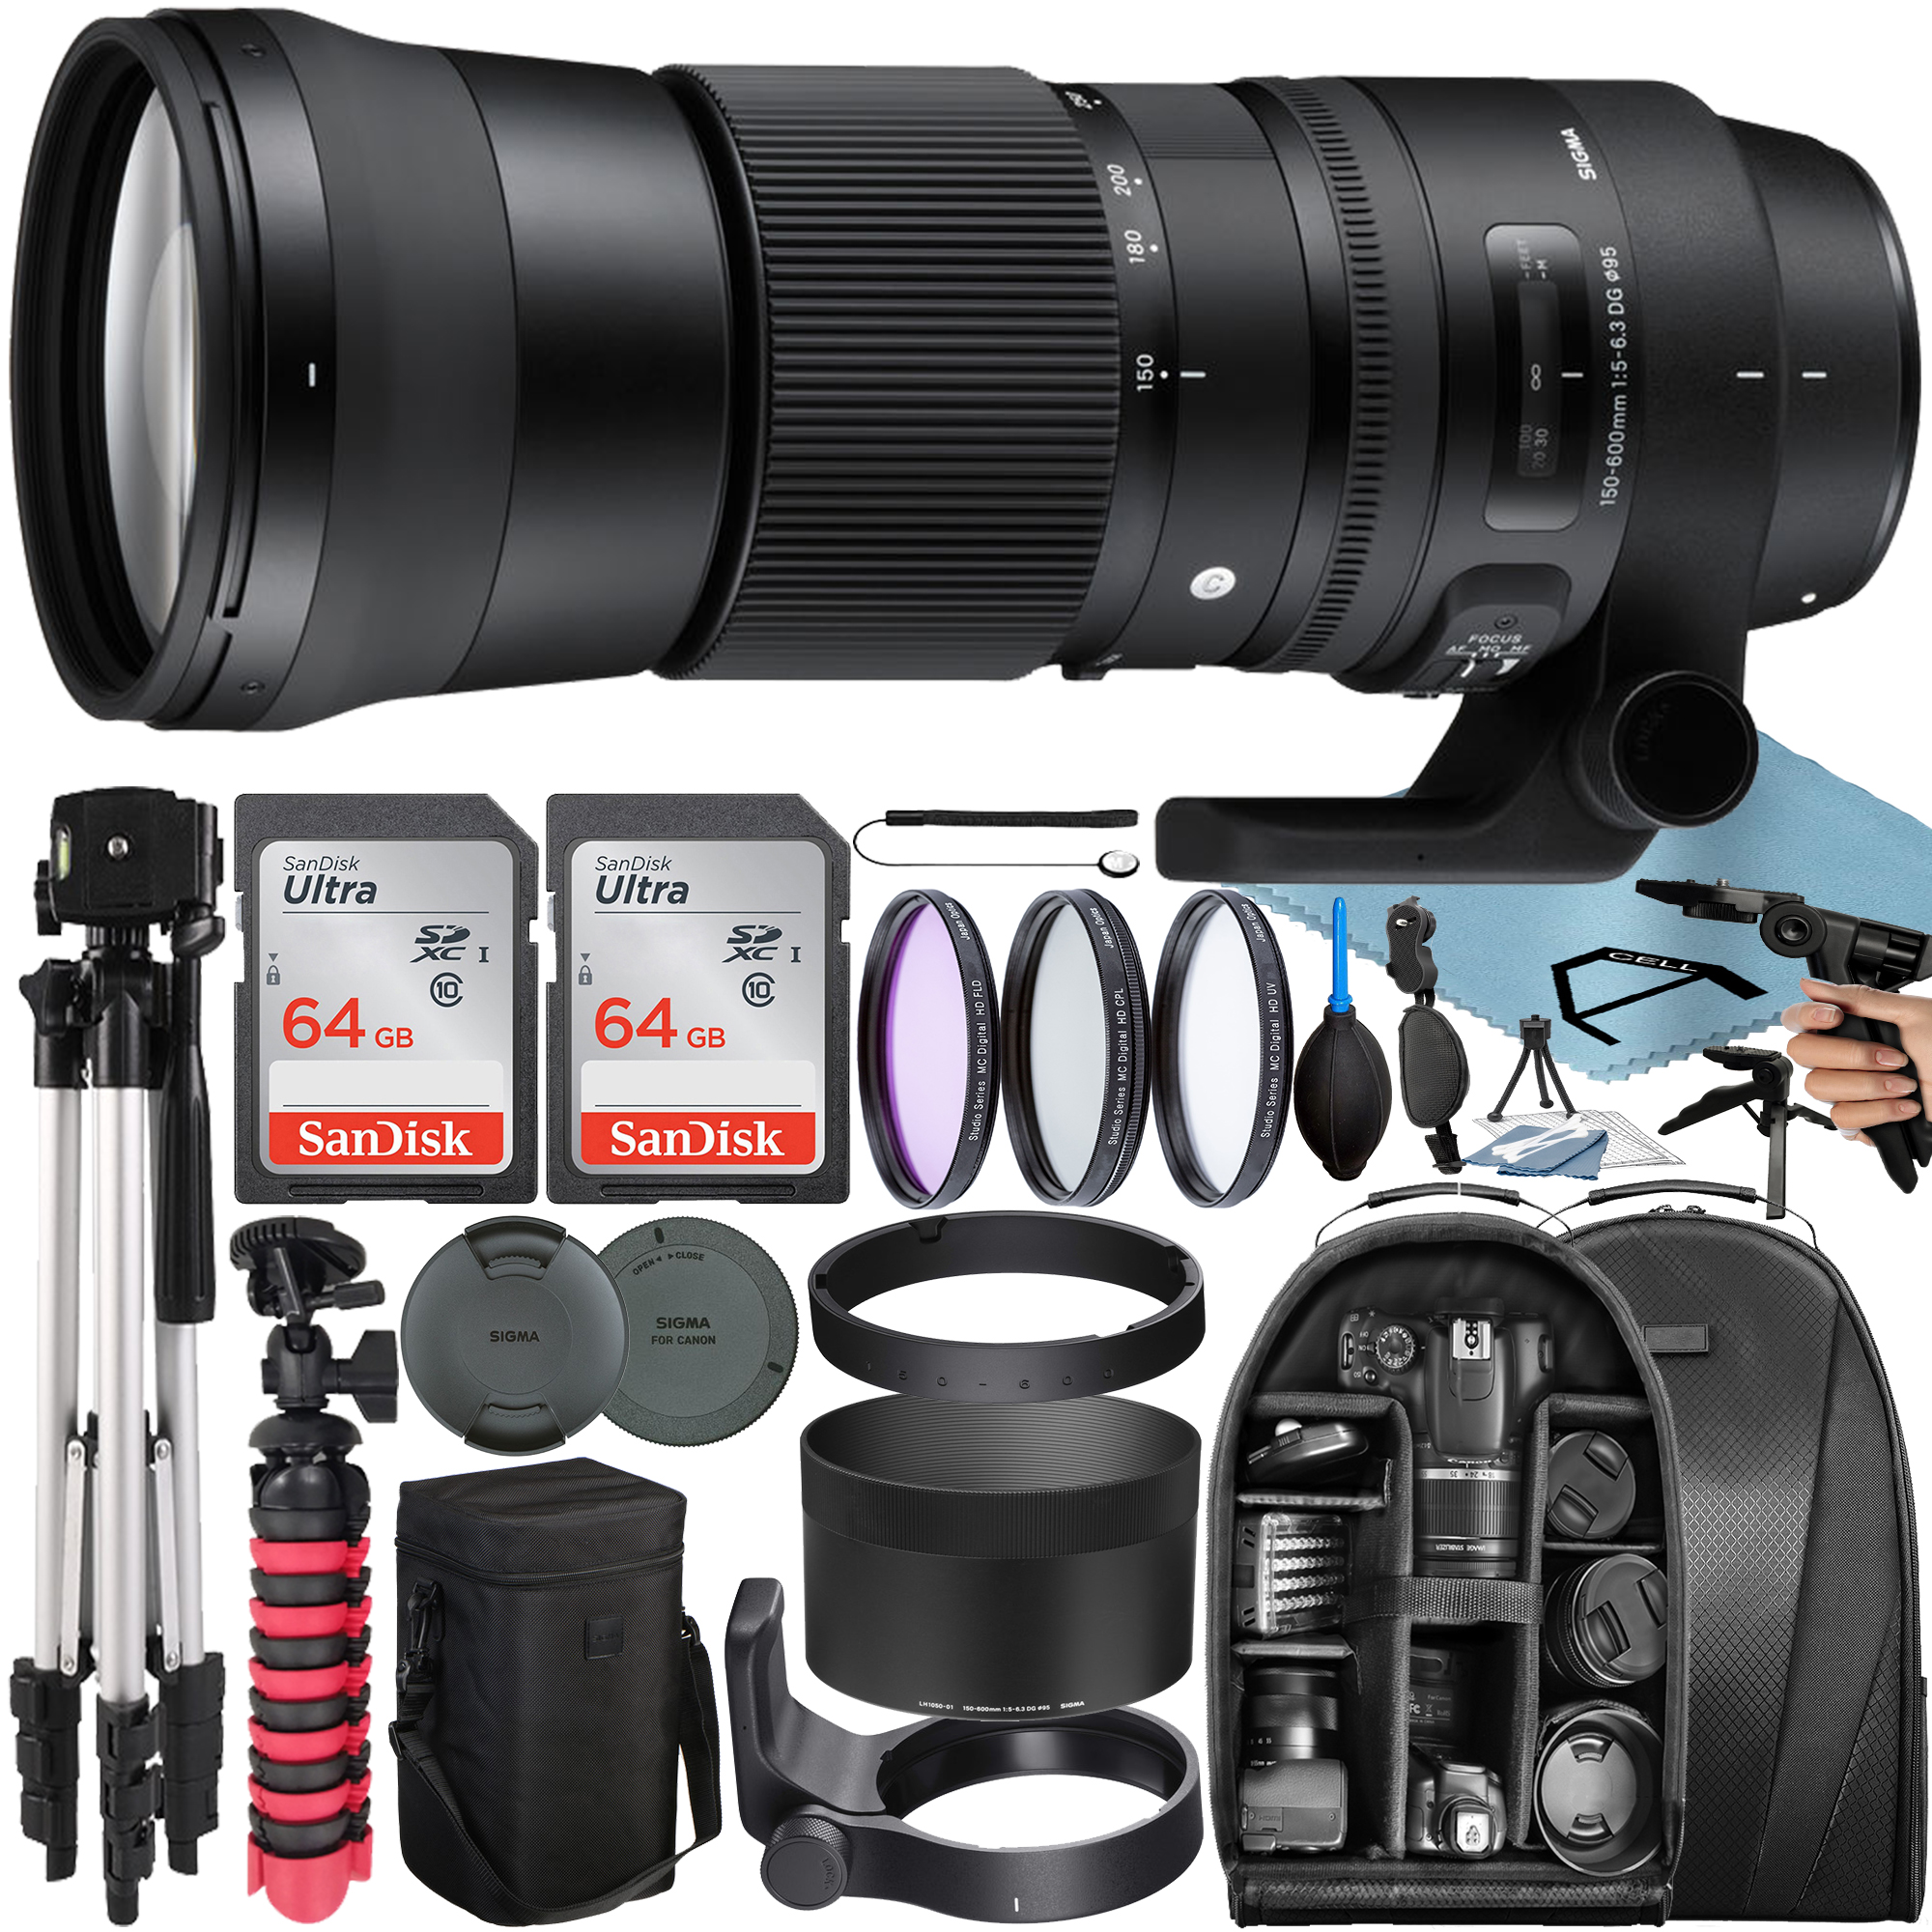 Sigma 150-600mm F/5-6.3 DG OS HSM Contemporary Lens for Canon EF with 2 Pack 64GB SanDisk Memory Card + Tripod + Backpack + A-Cell Accessory Bundle